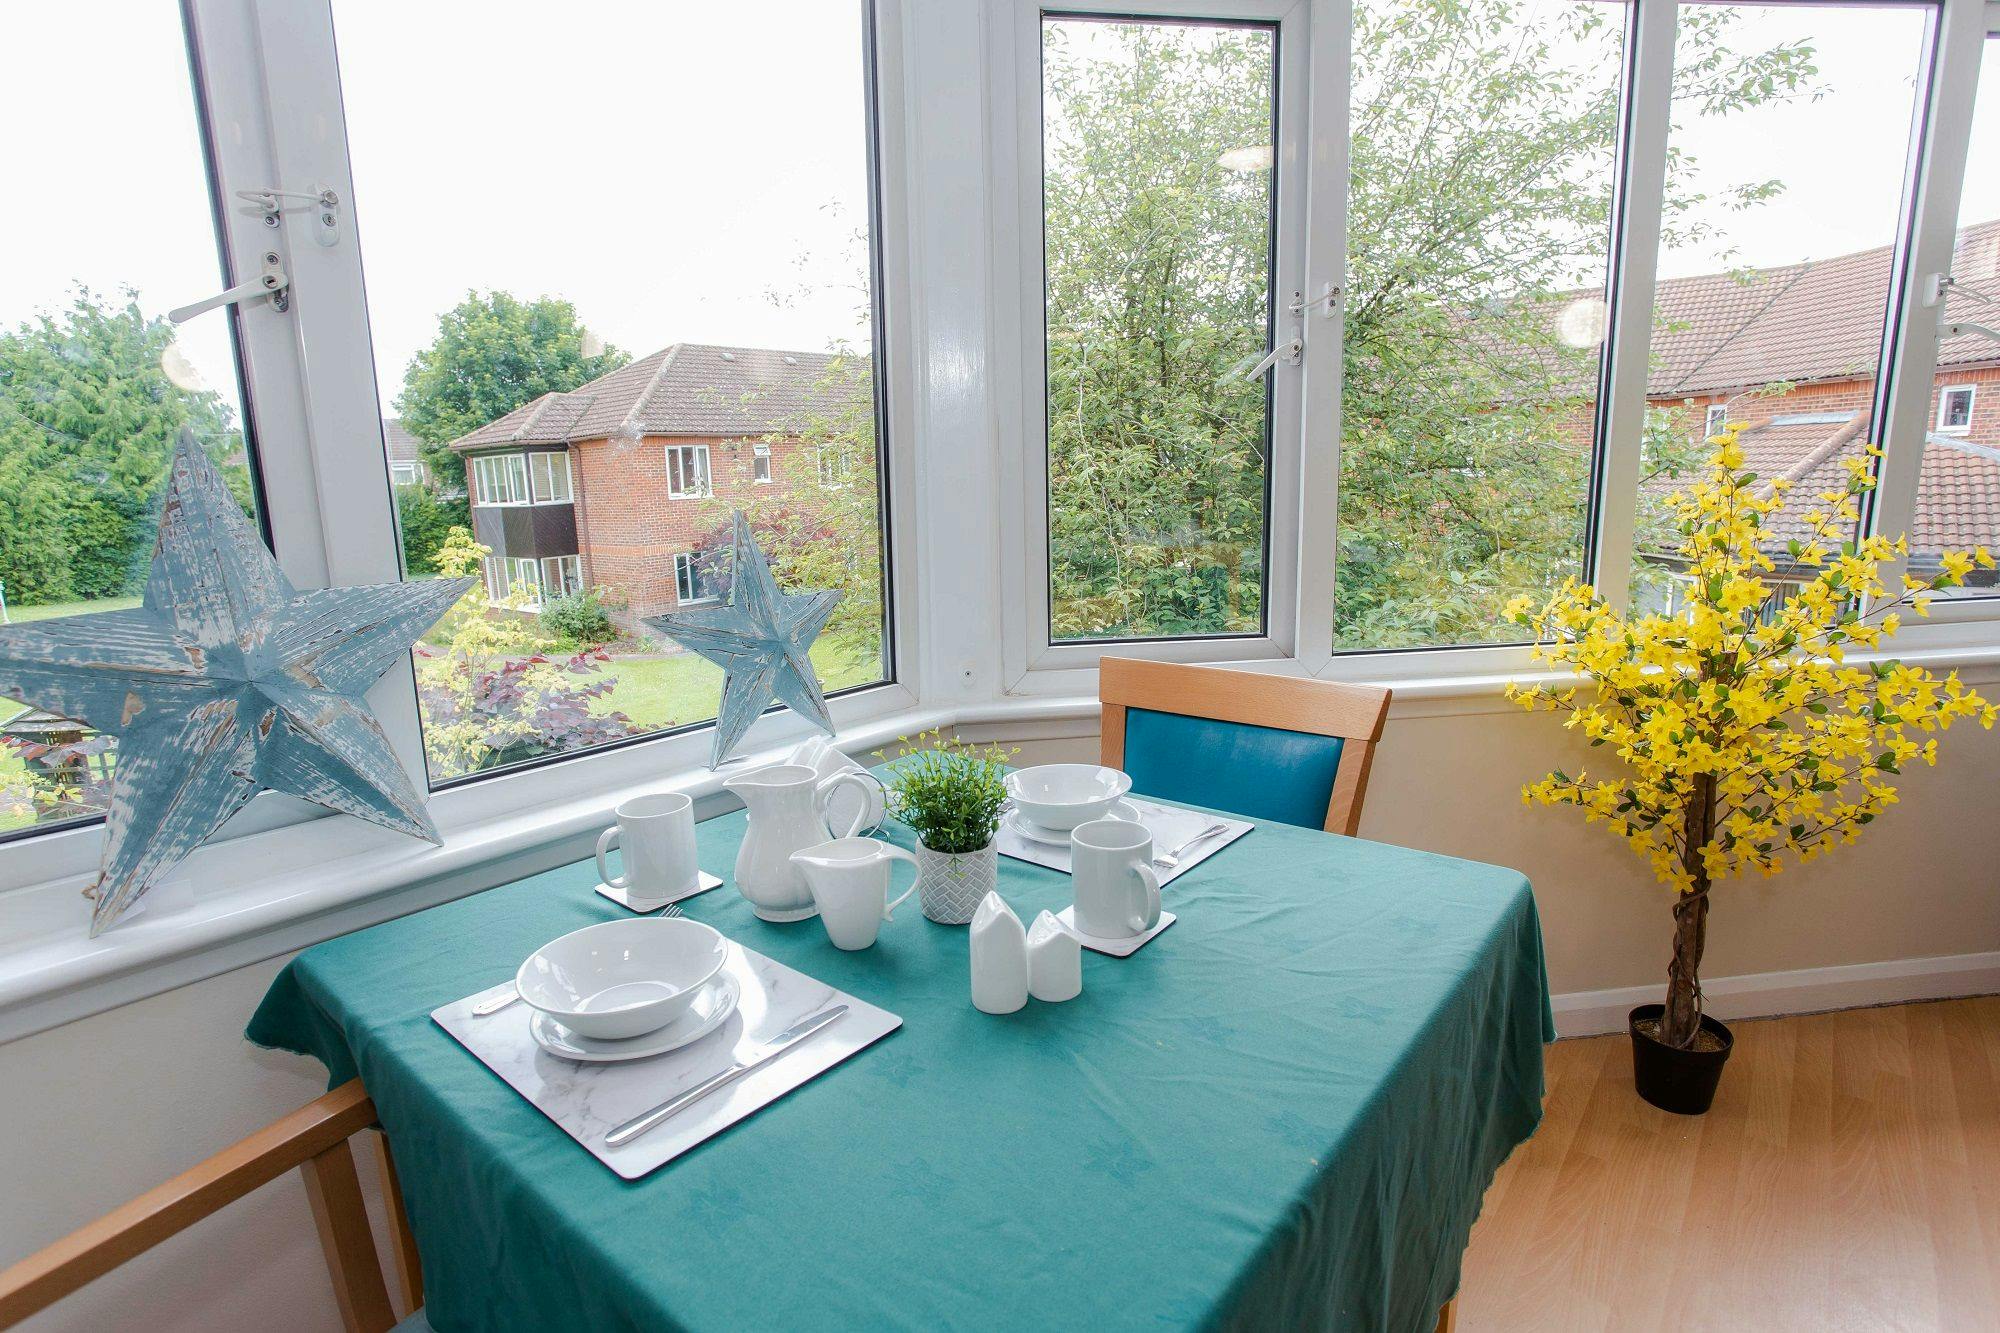 Dining Area at Providence Court care Home in Baldock, Hertfordshire